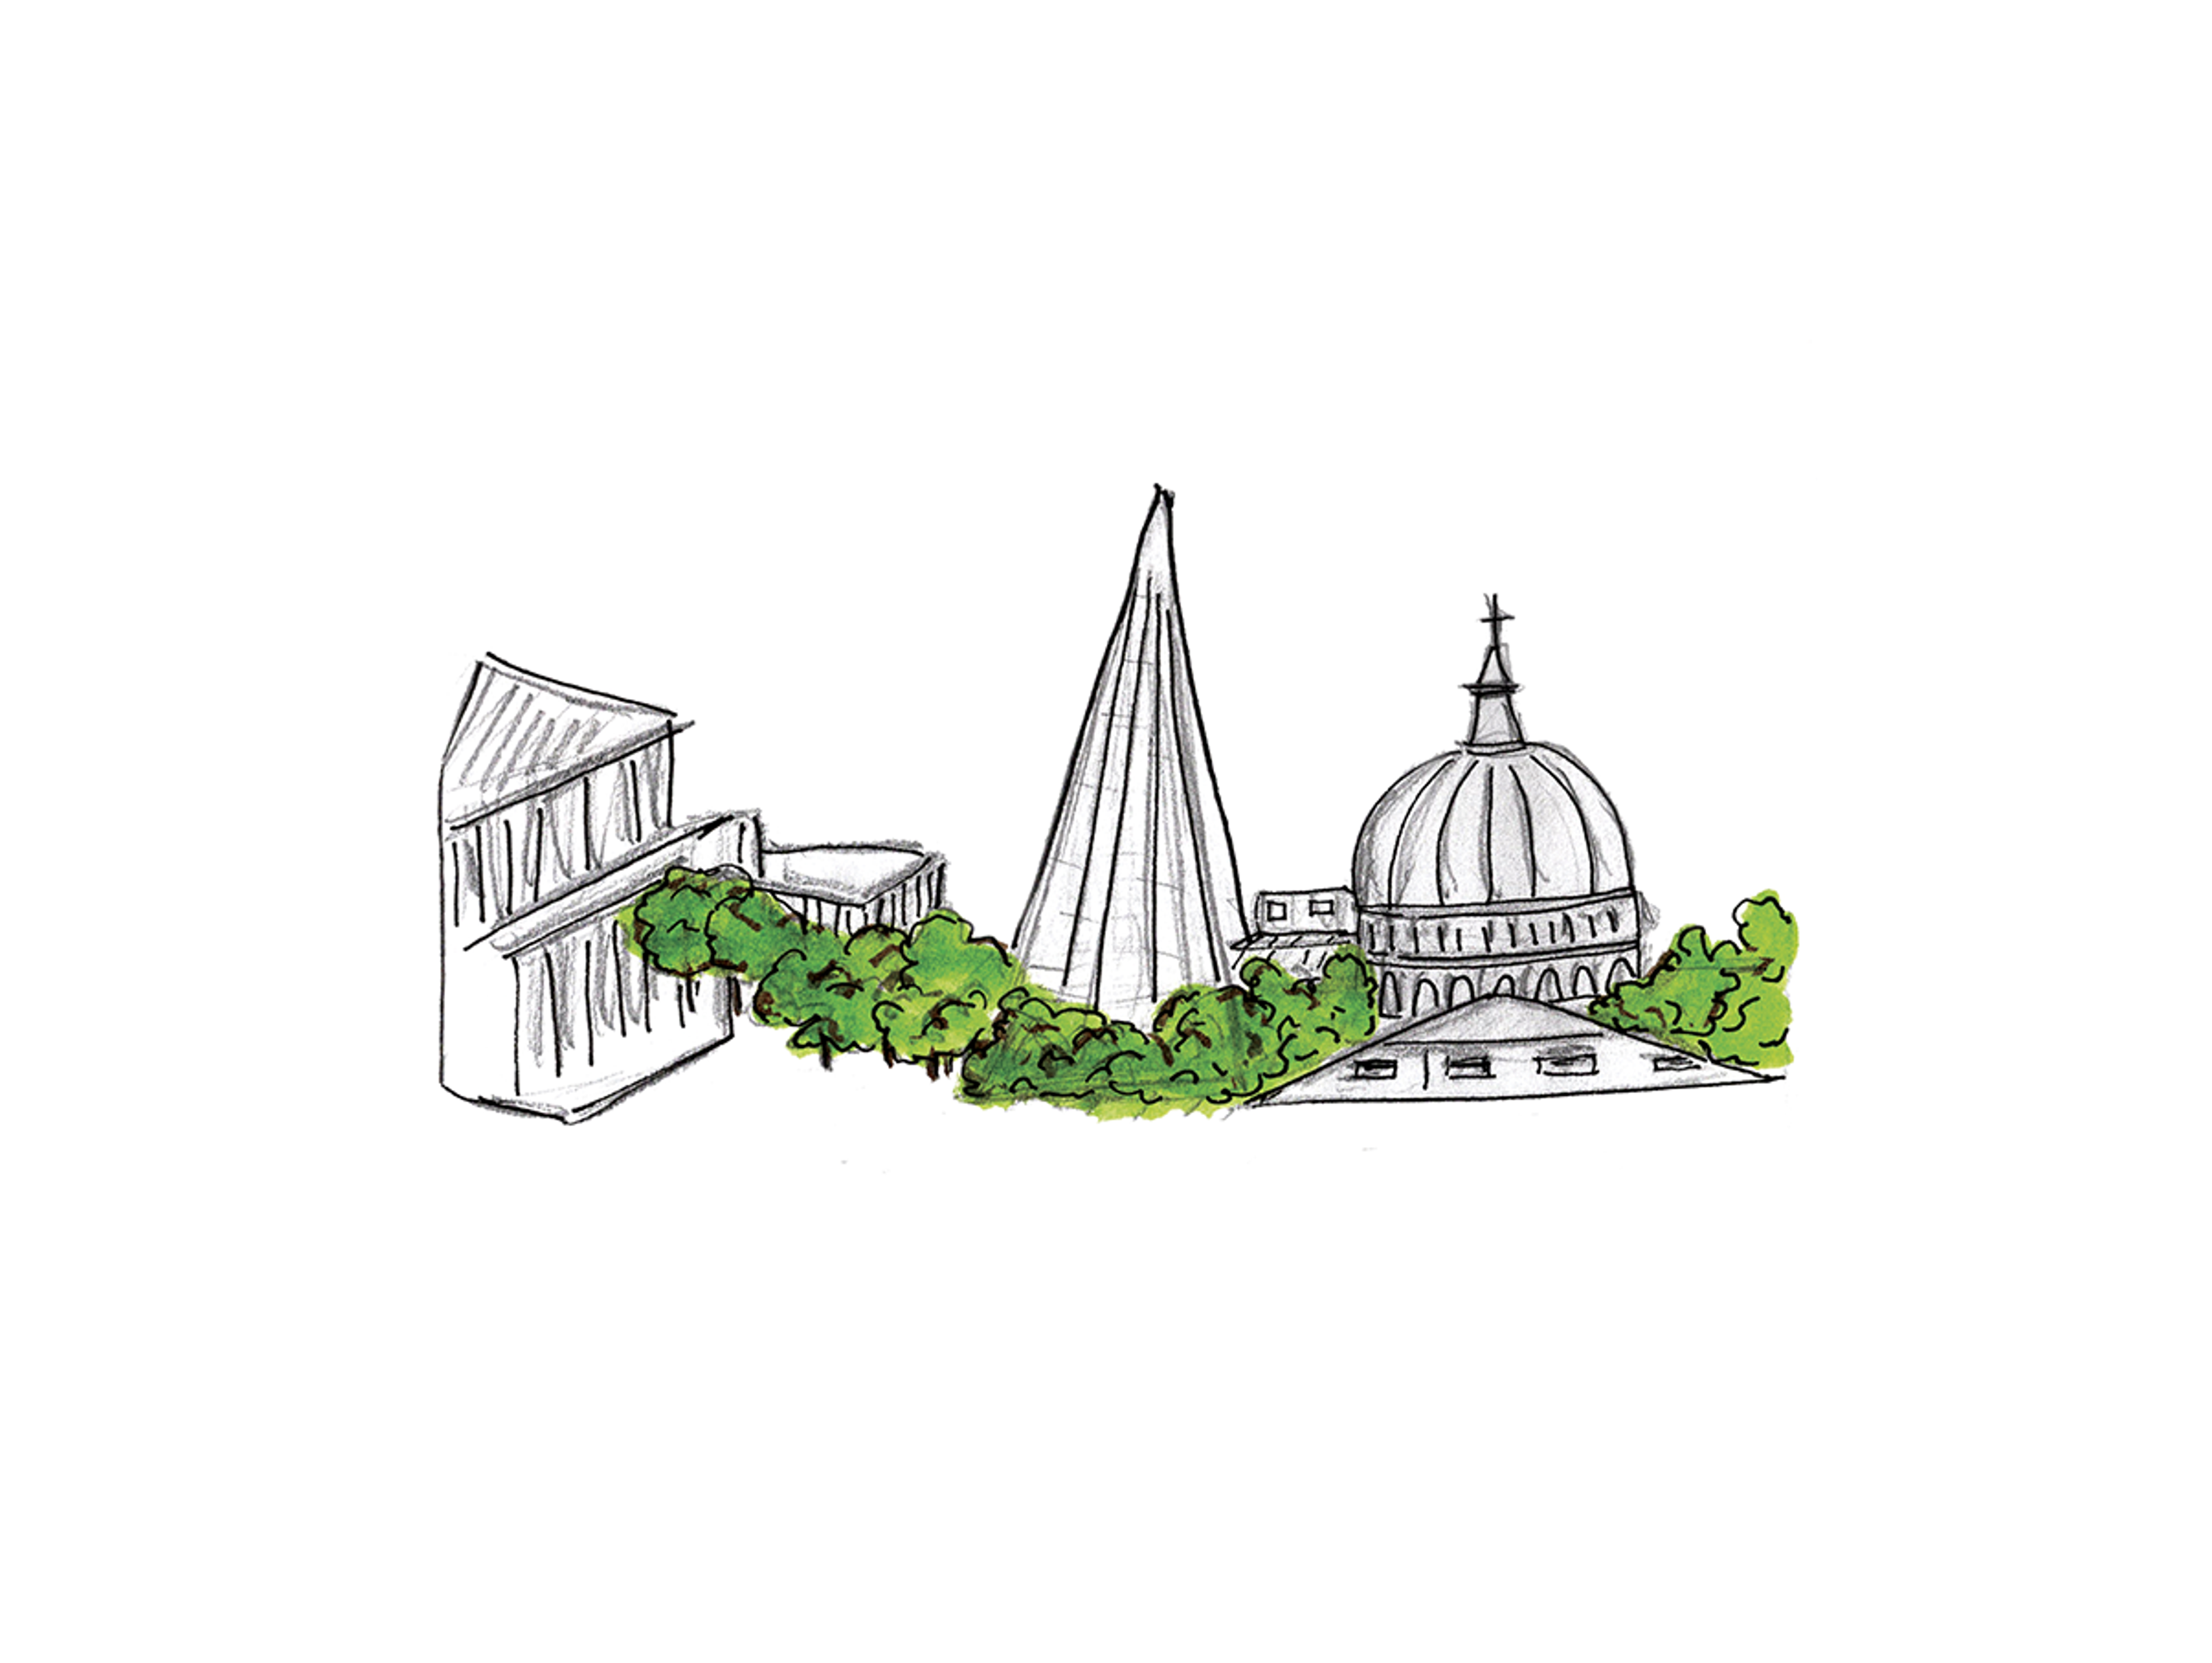 Illustration of a city skyline showing a domed roof, a skyscraper and a Georgian looking building